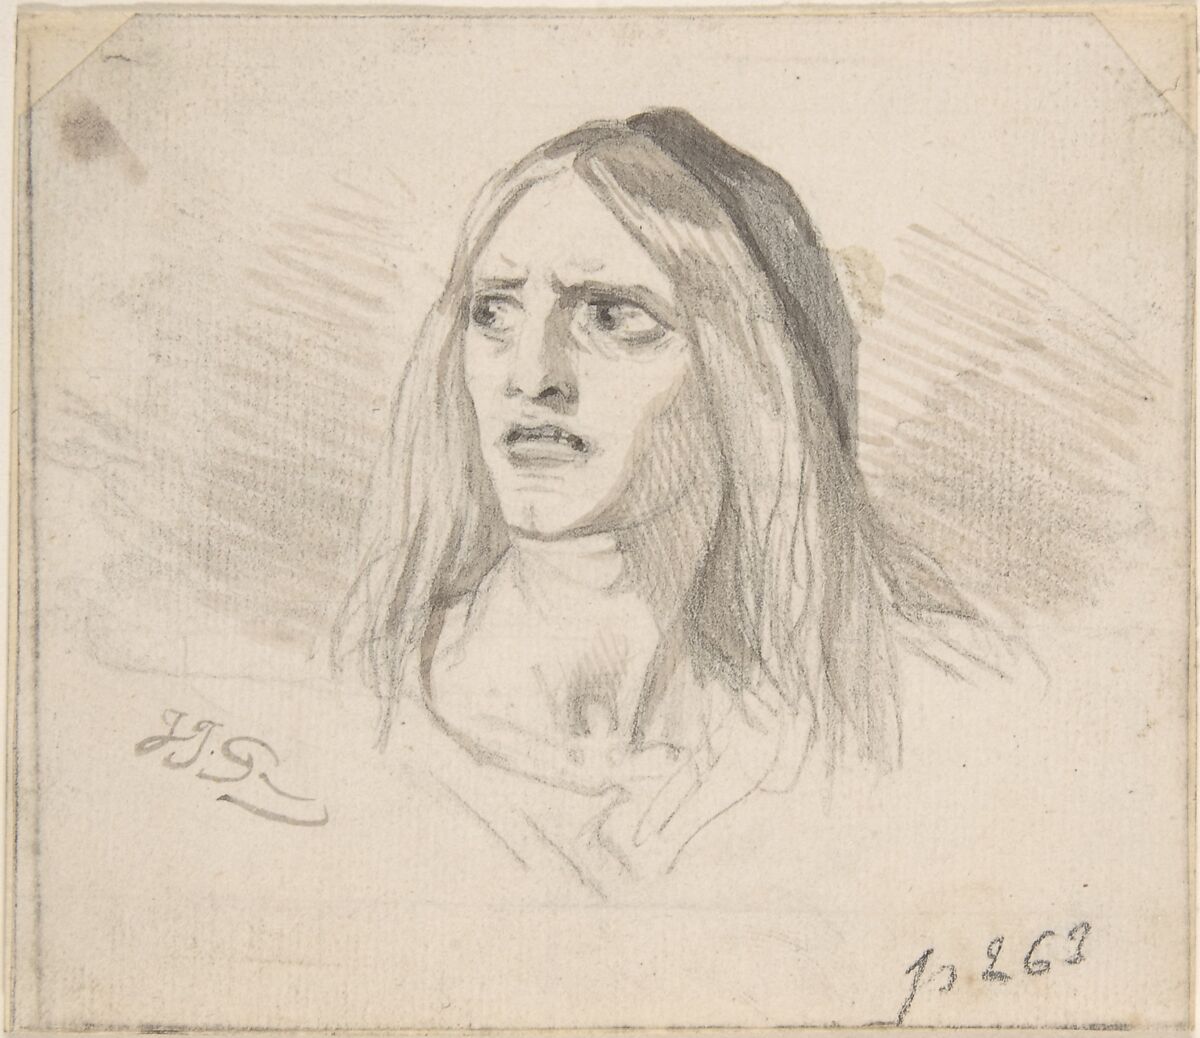 Illustration in Jérôme Paturot, by Louis Reybaud, Paris, 1846, J. J. Grandville (French, Nancy 1803–1847 Vanves), Brush and gray wash over graphite. 